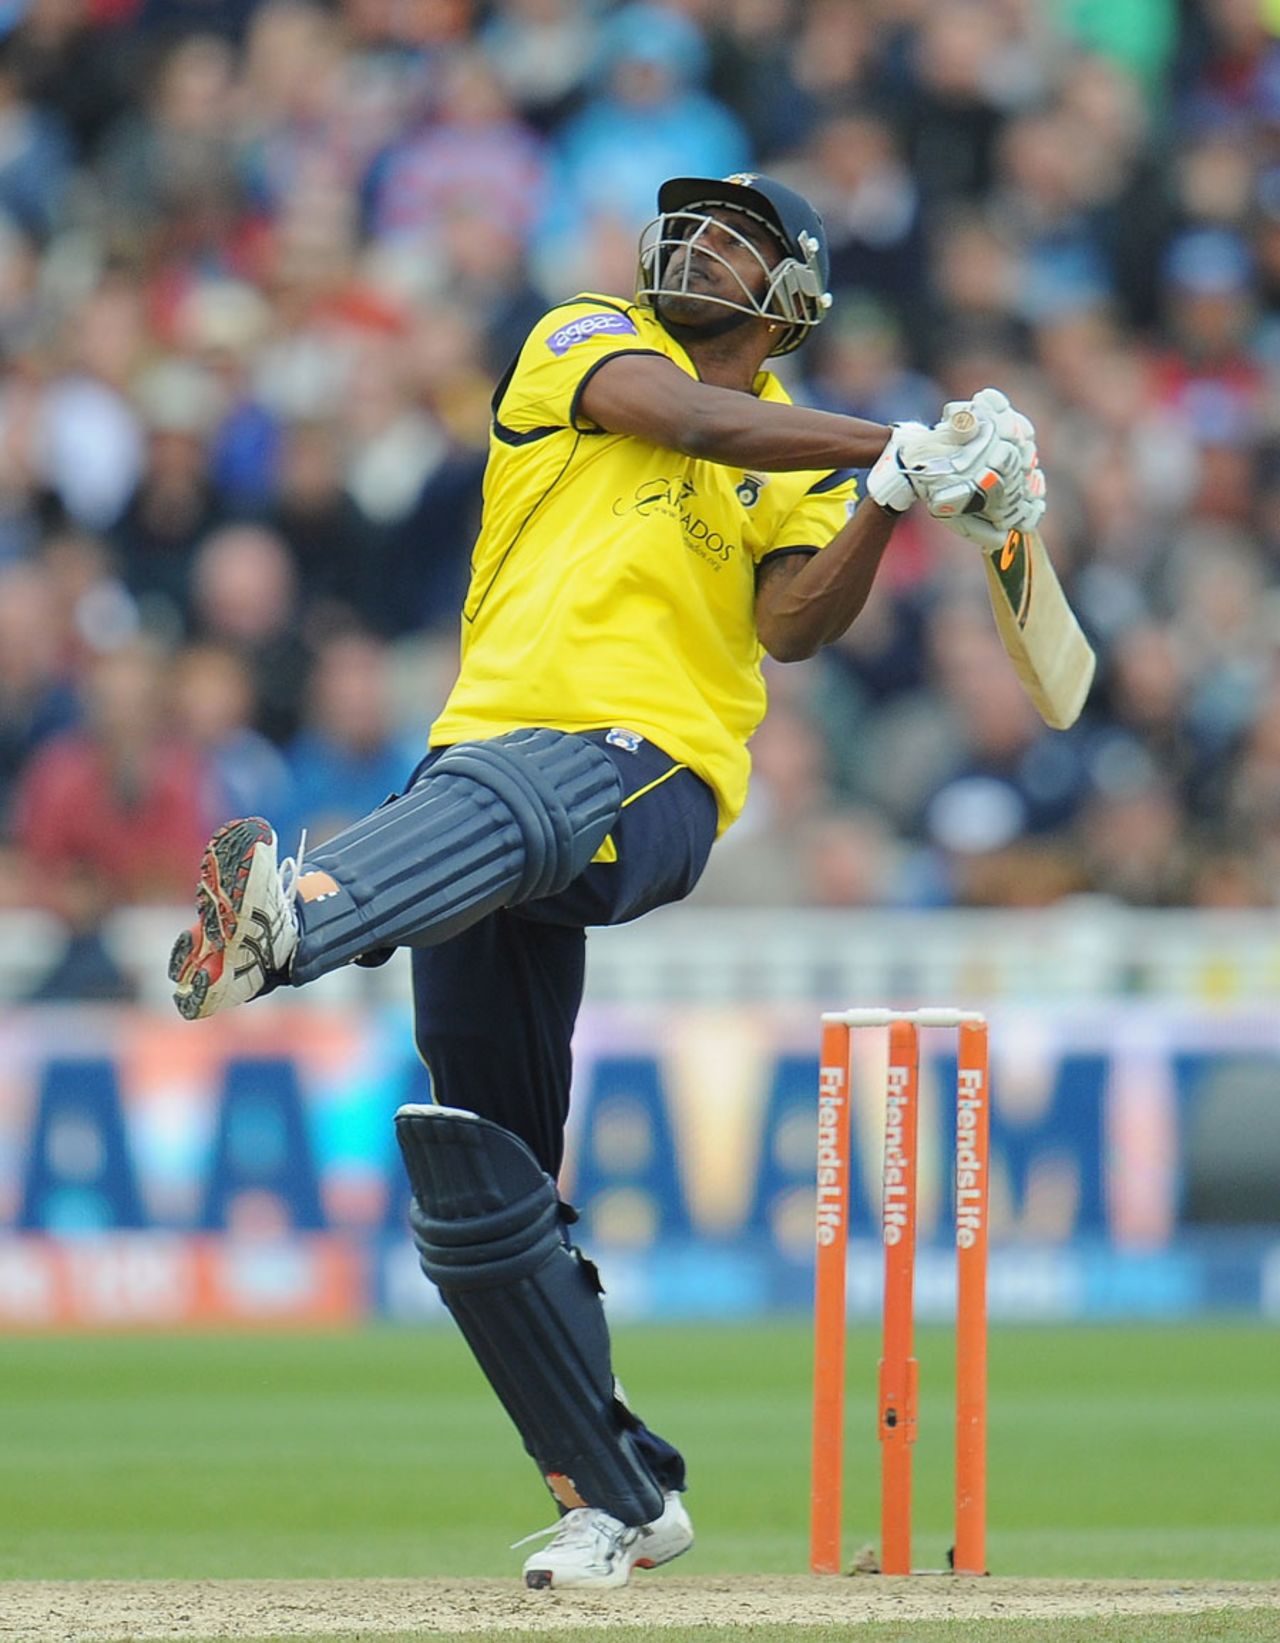 Dimitri Mascarenhas swung a late boundary to boost his side's total, Hampshire v Surrey, Friends Life t20, semi-final. Edgbaston, August 17, 2013